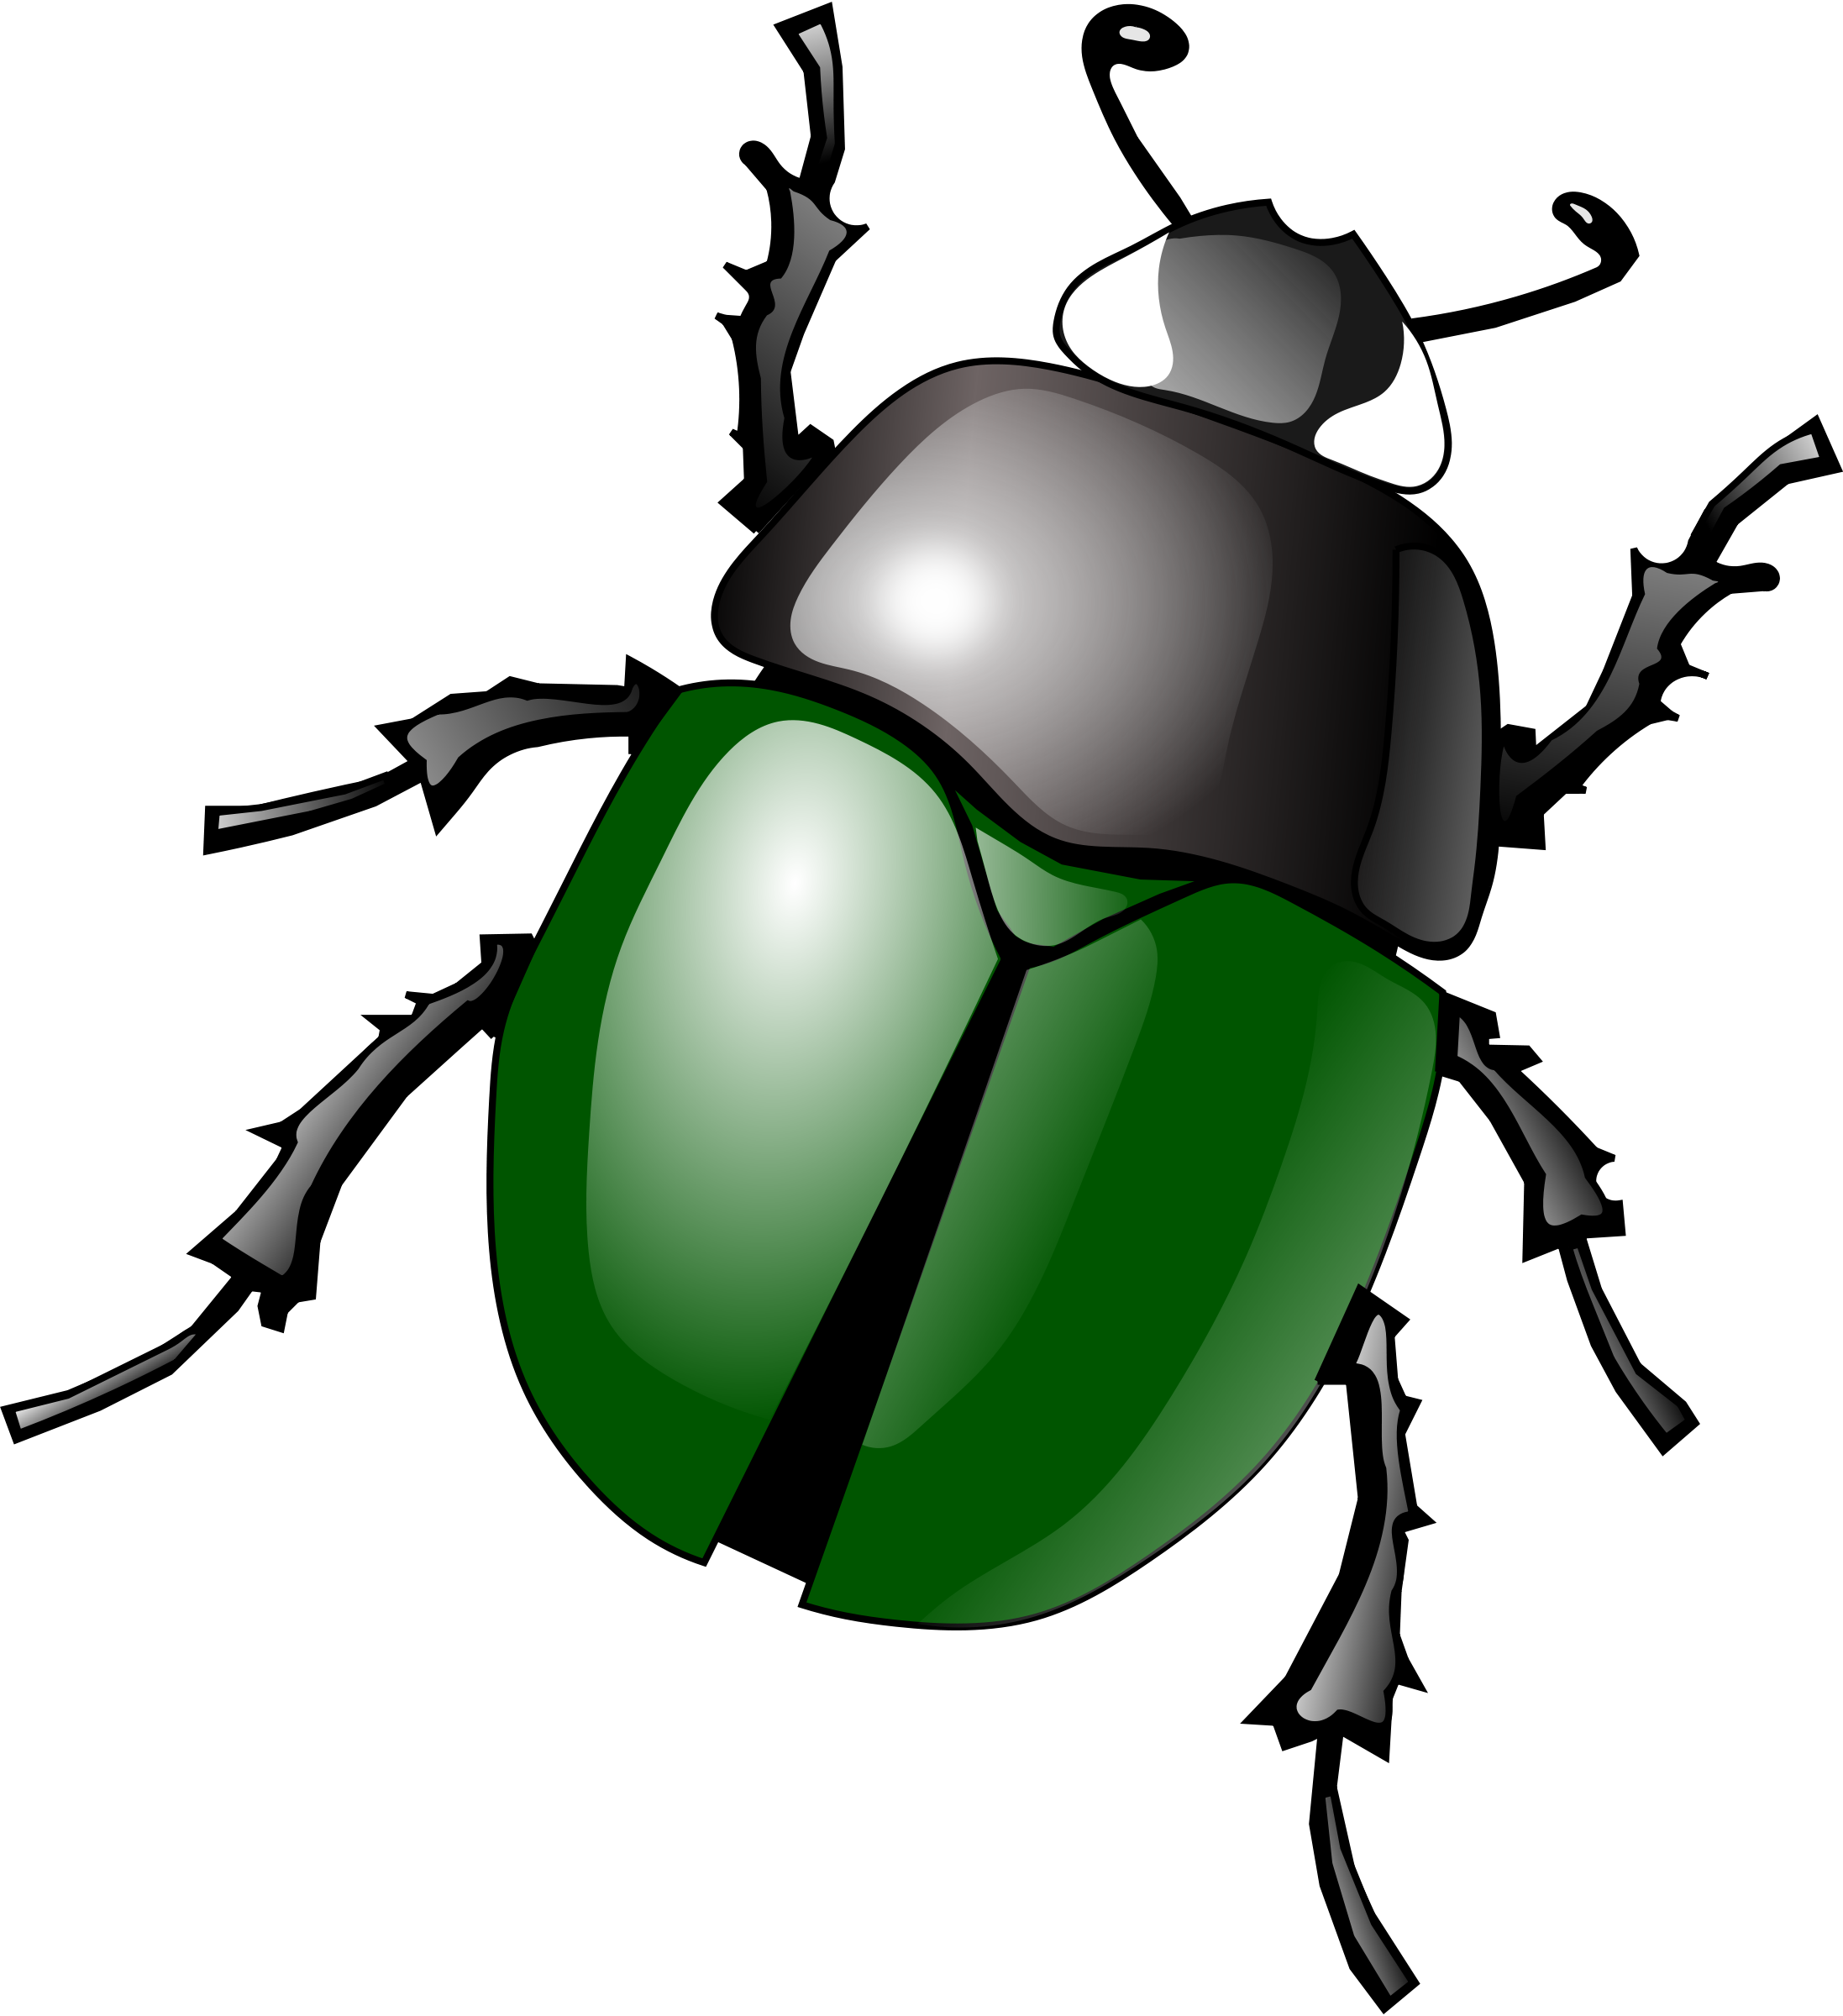 Fly bug insect clip art free vector for free download about image